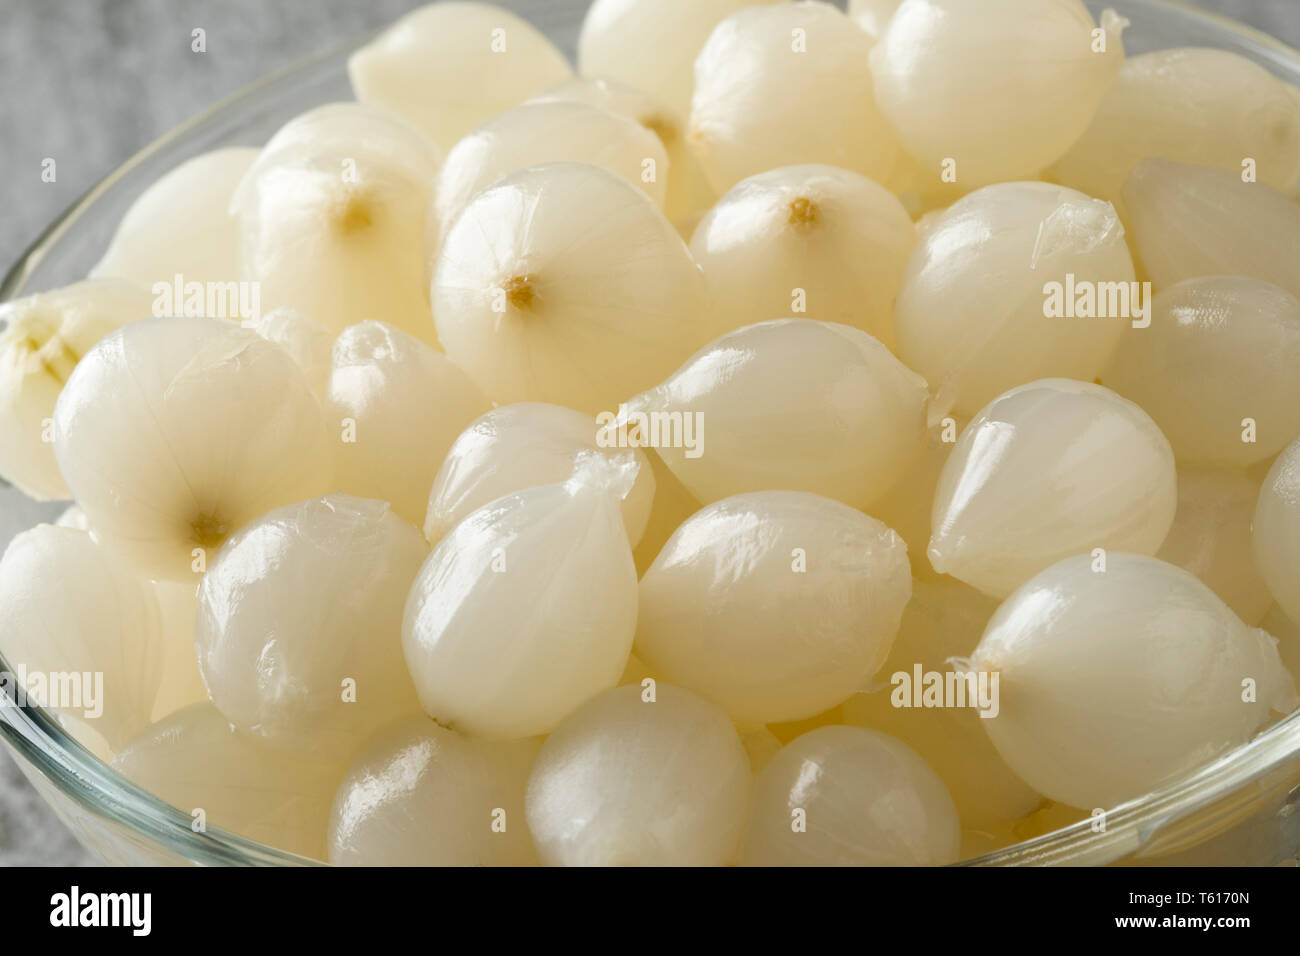 Pickled Onions Silverskin Onions High Resolution Stock Photography And Images Alamy